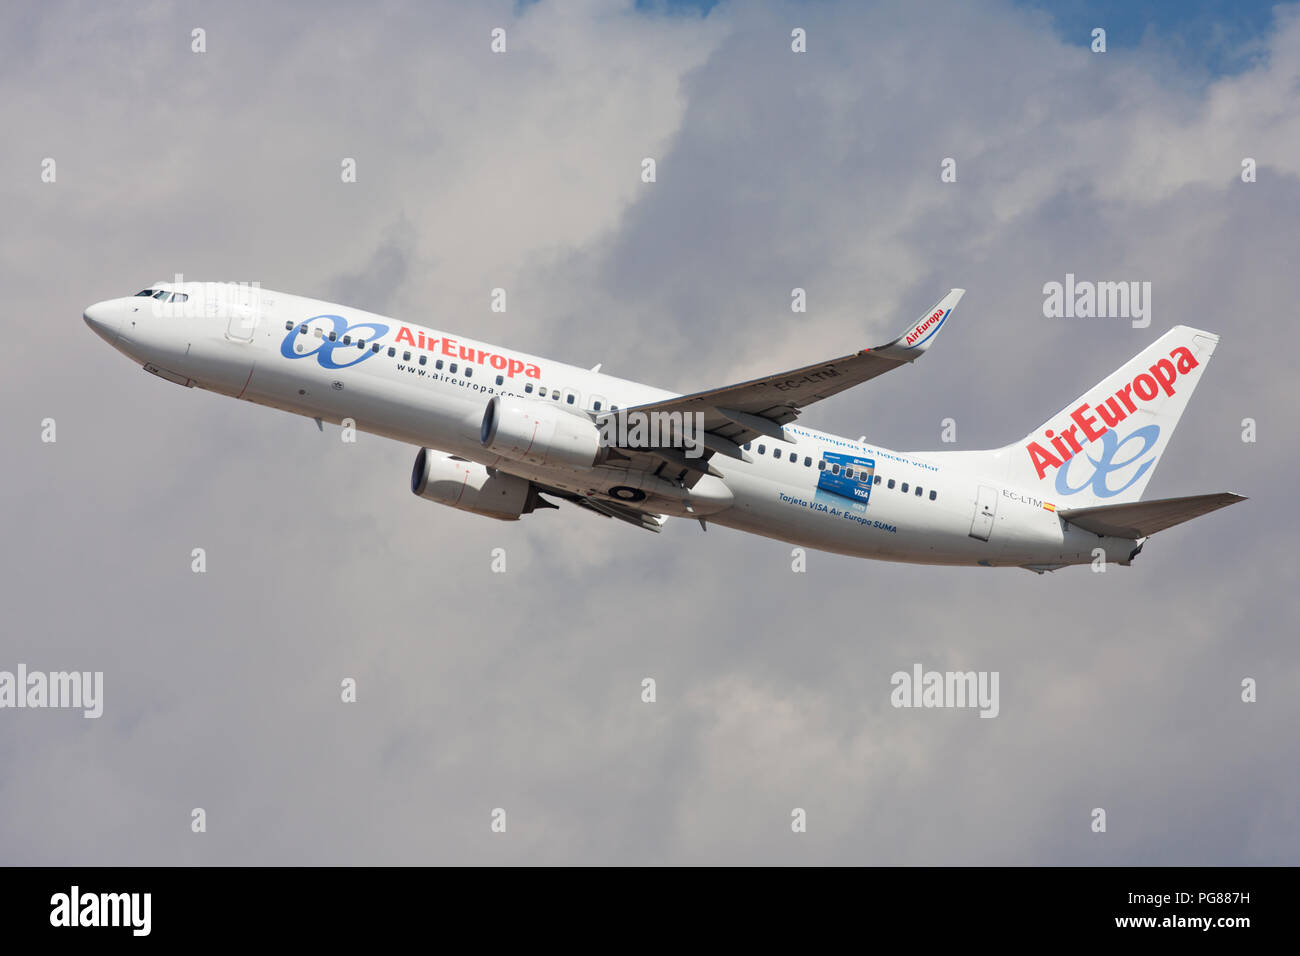 Barcelona, Spain - August 15, 2018: Air Europa Boeing 737 with Visa promotional livery taking off from El Prat Airport in Barcelona, Spain. Stock Photo